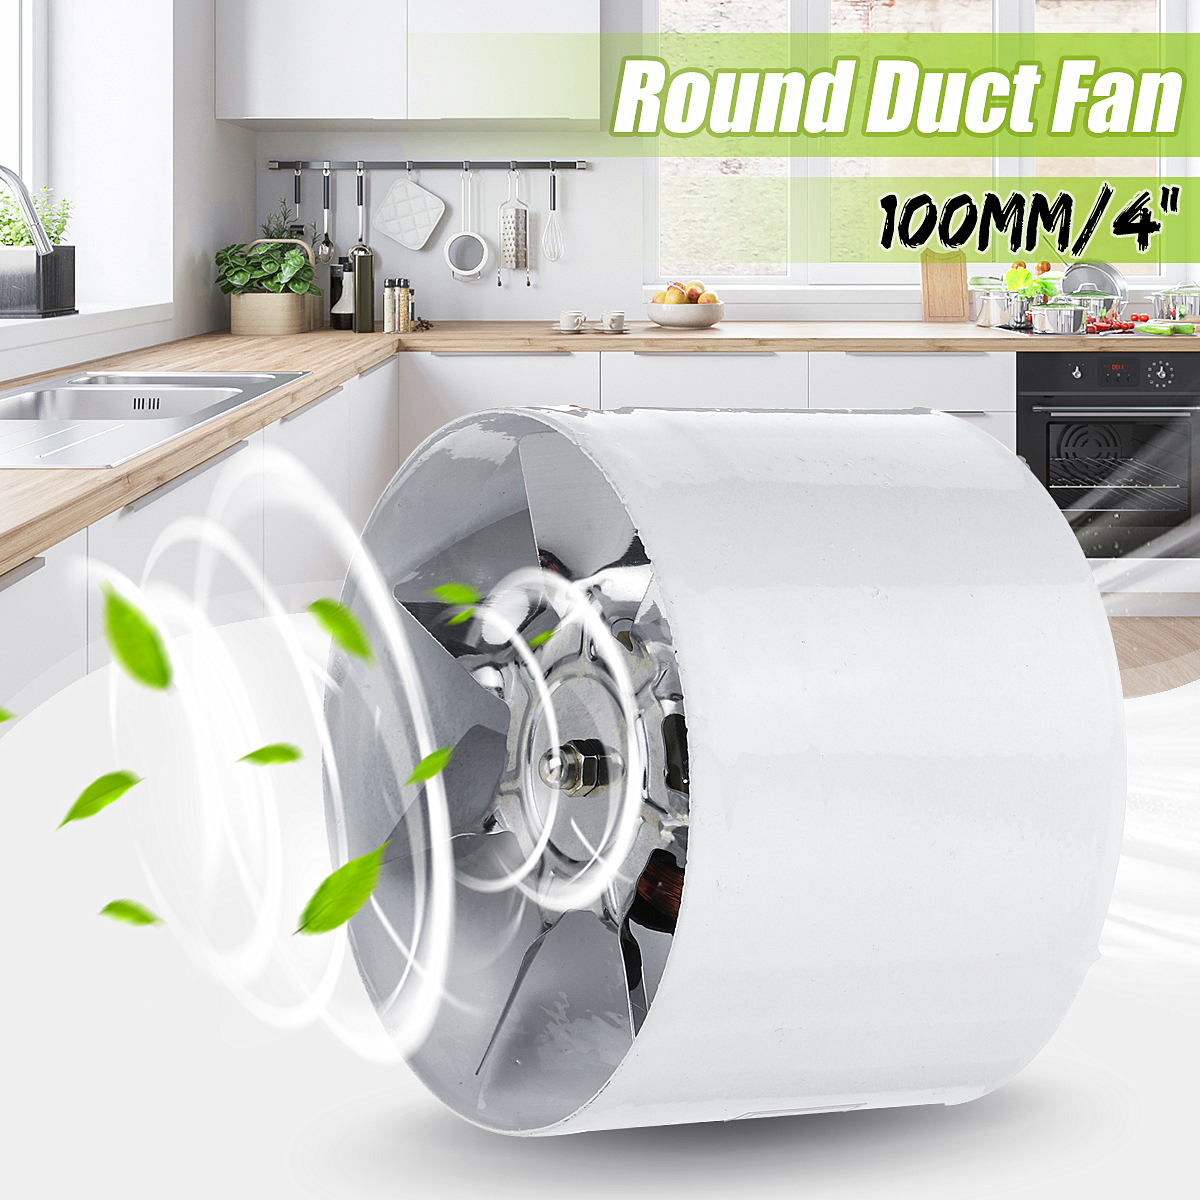 220V 100mm/4'' Round Exhaust Duct Vent Fan High Speed Ventilation Fan Kitchen Room